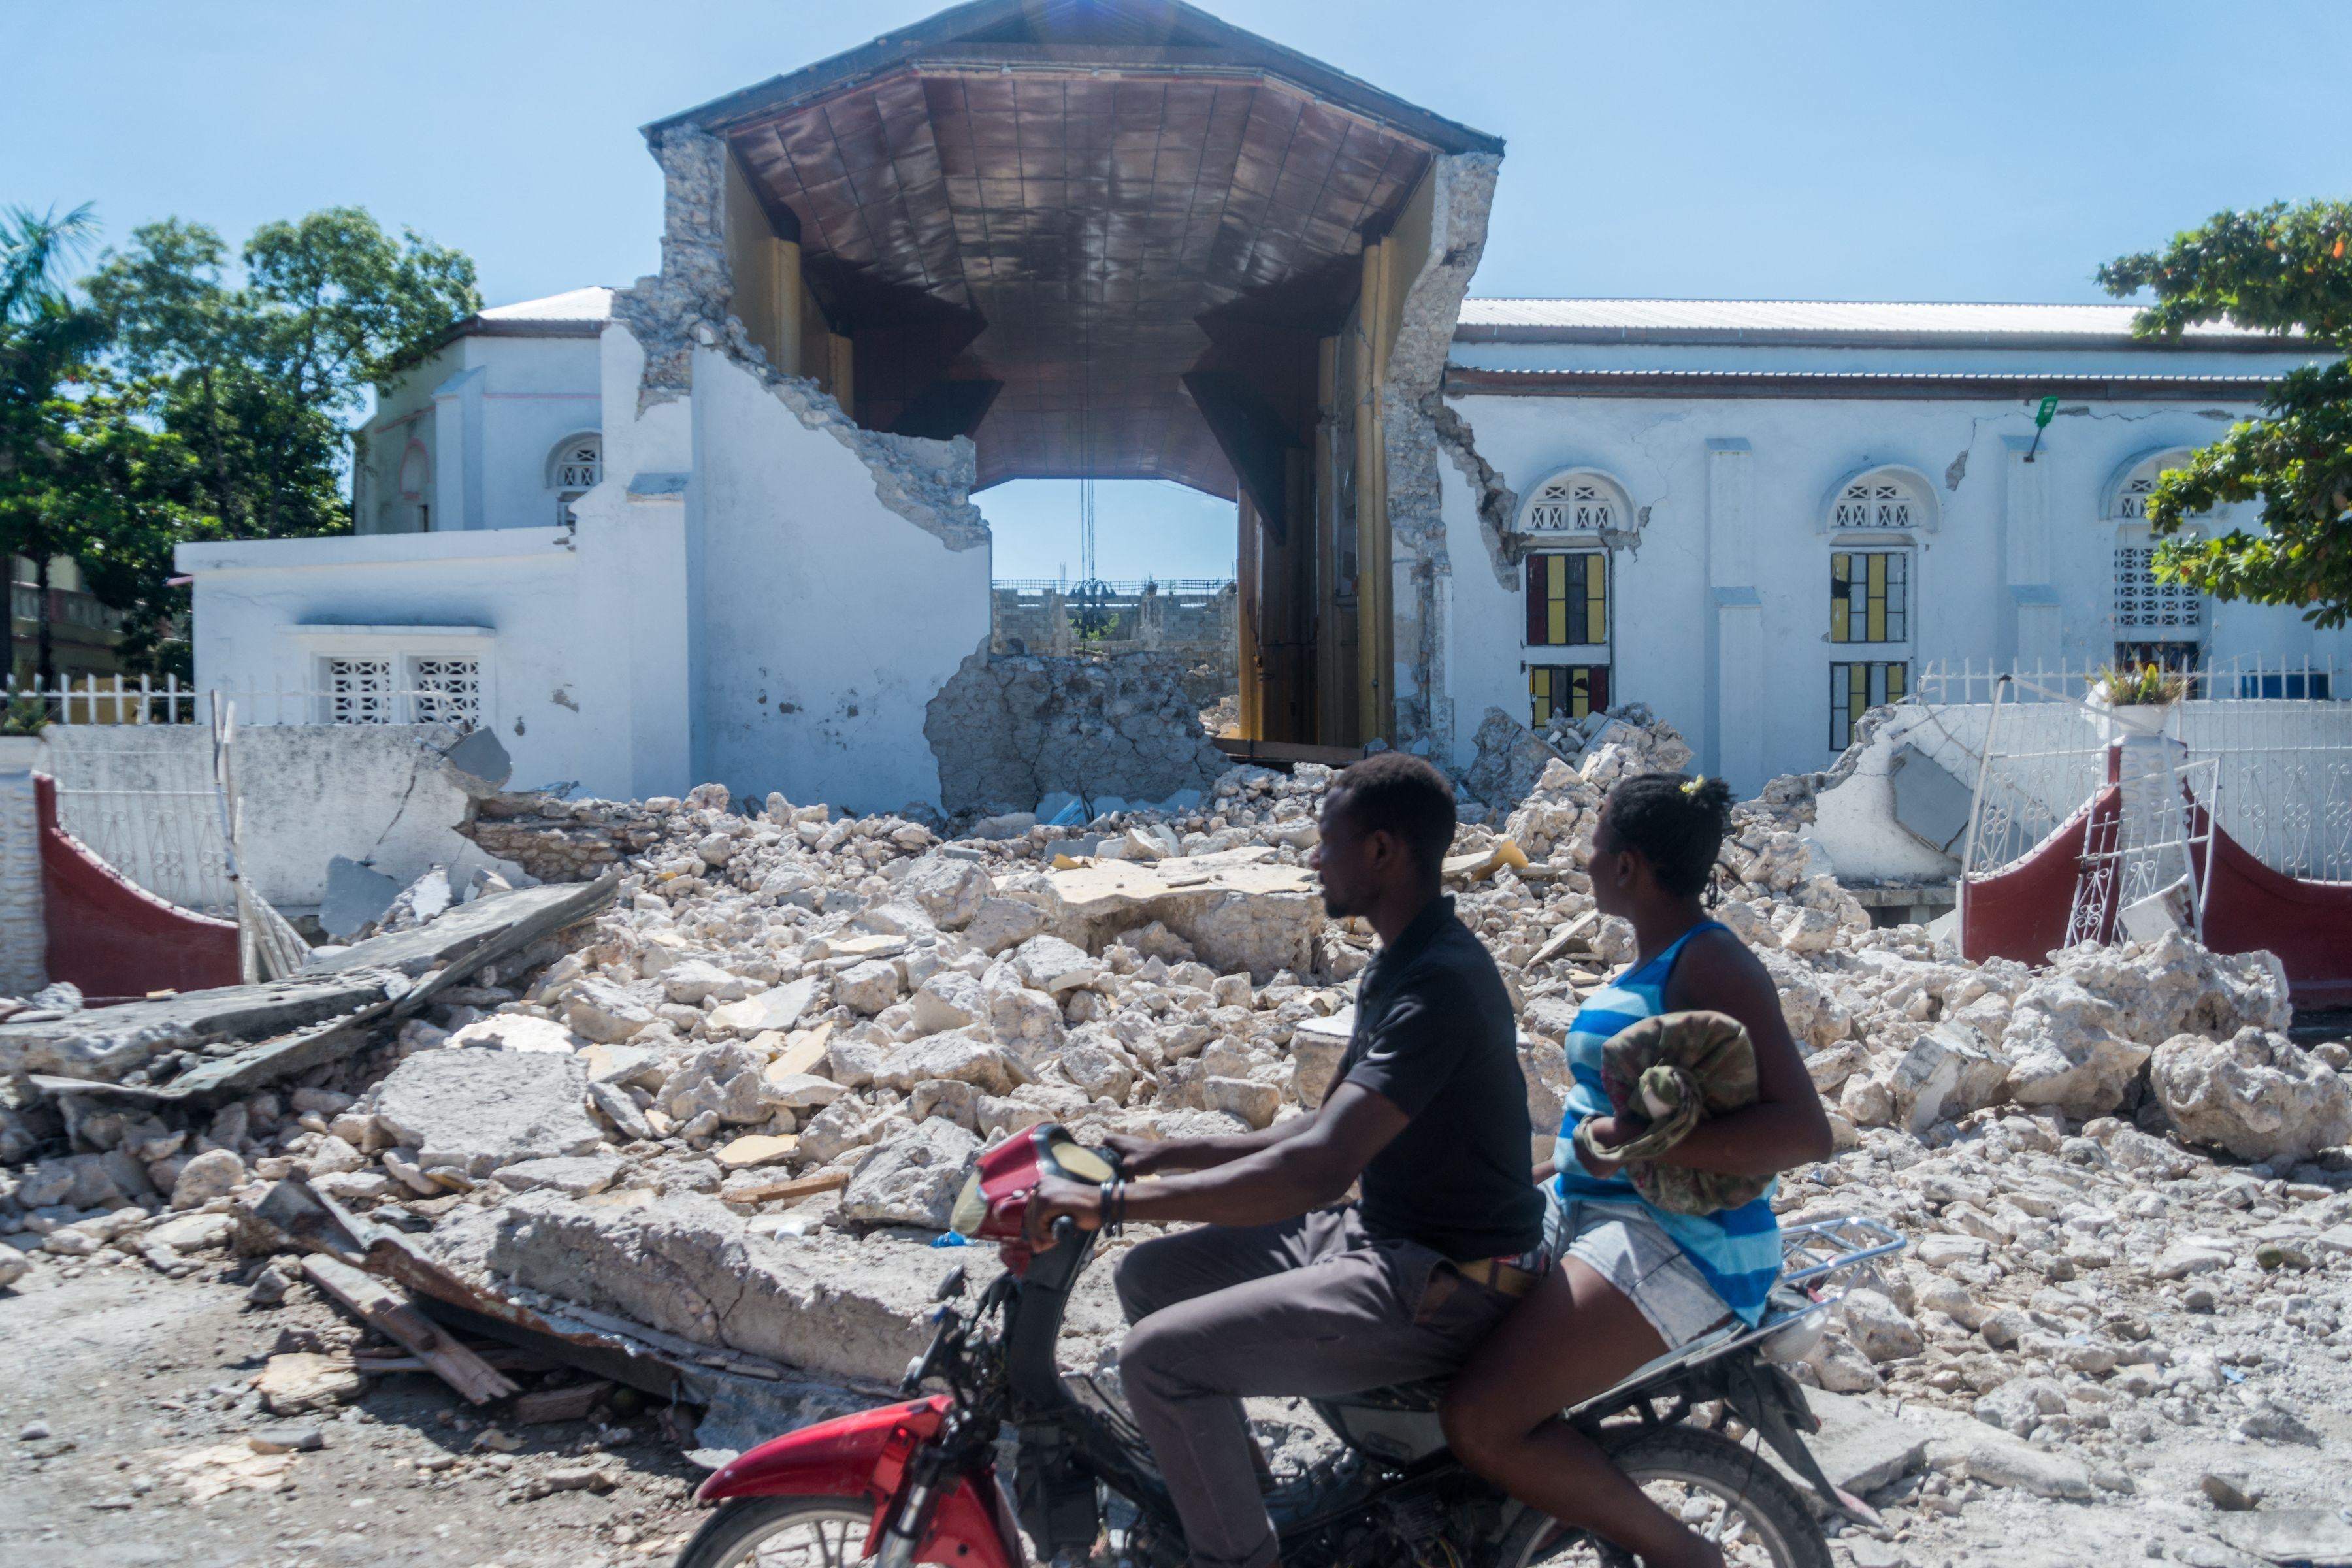 Two people on a motorbike ride past a pile of rubble in front of the husk of the church building